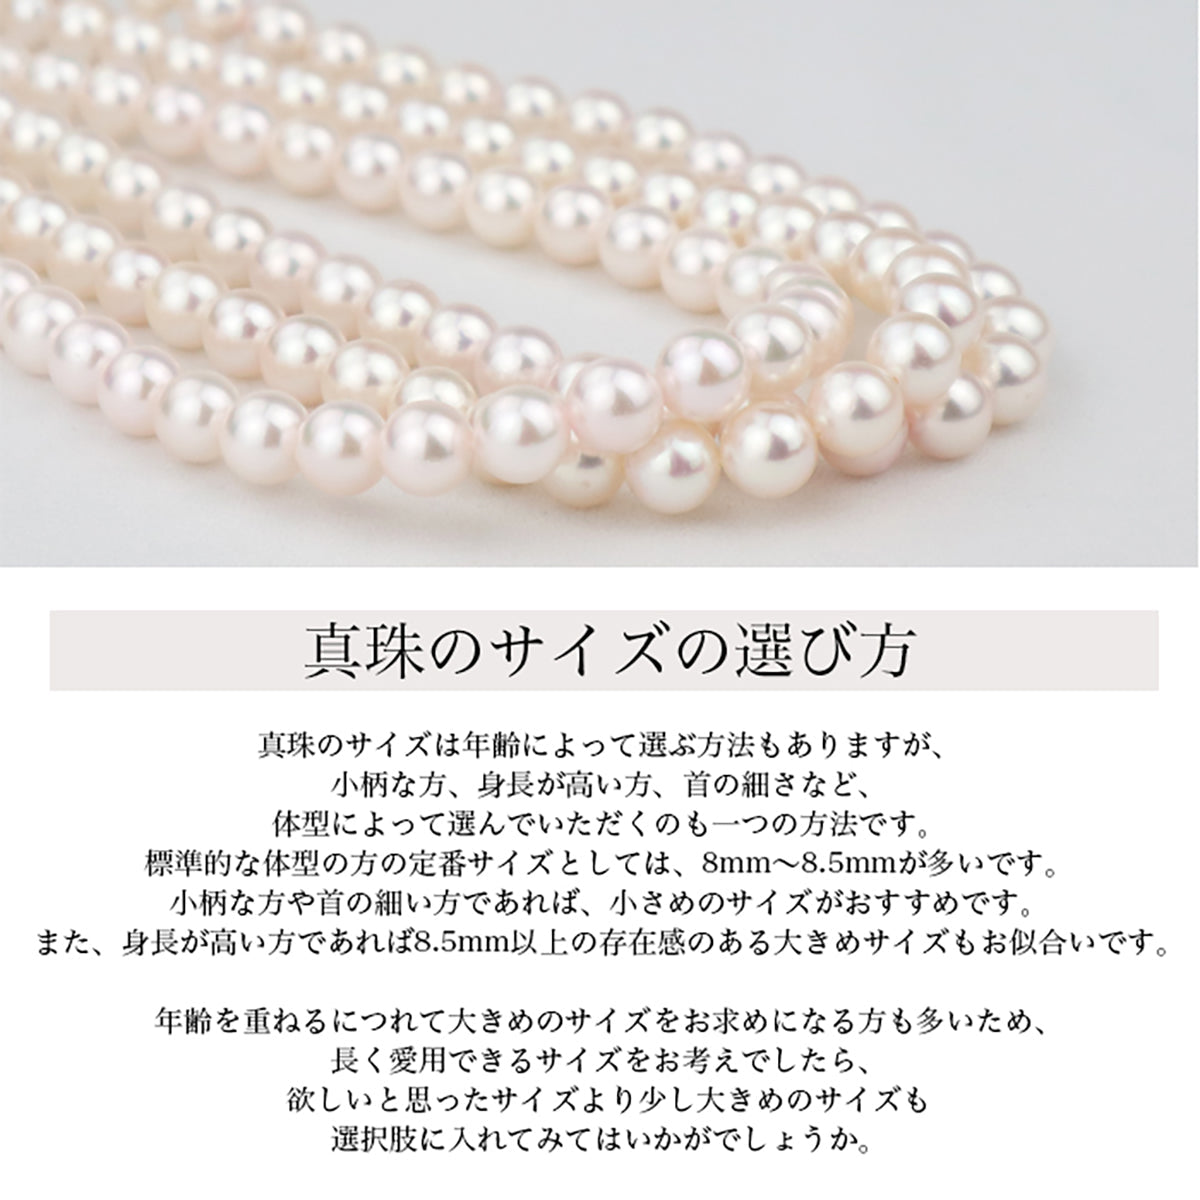 Akoya Pearl Formal Necklace Set of 2 [7.5-8.0mm] (Earrings included) Regular Size Formal Set with Certificate of Authenticity and Storage Case